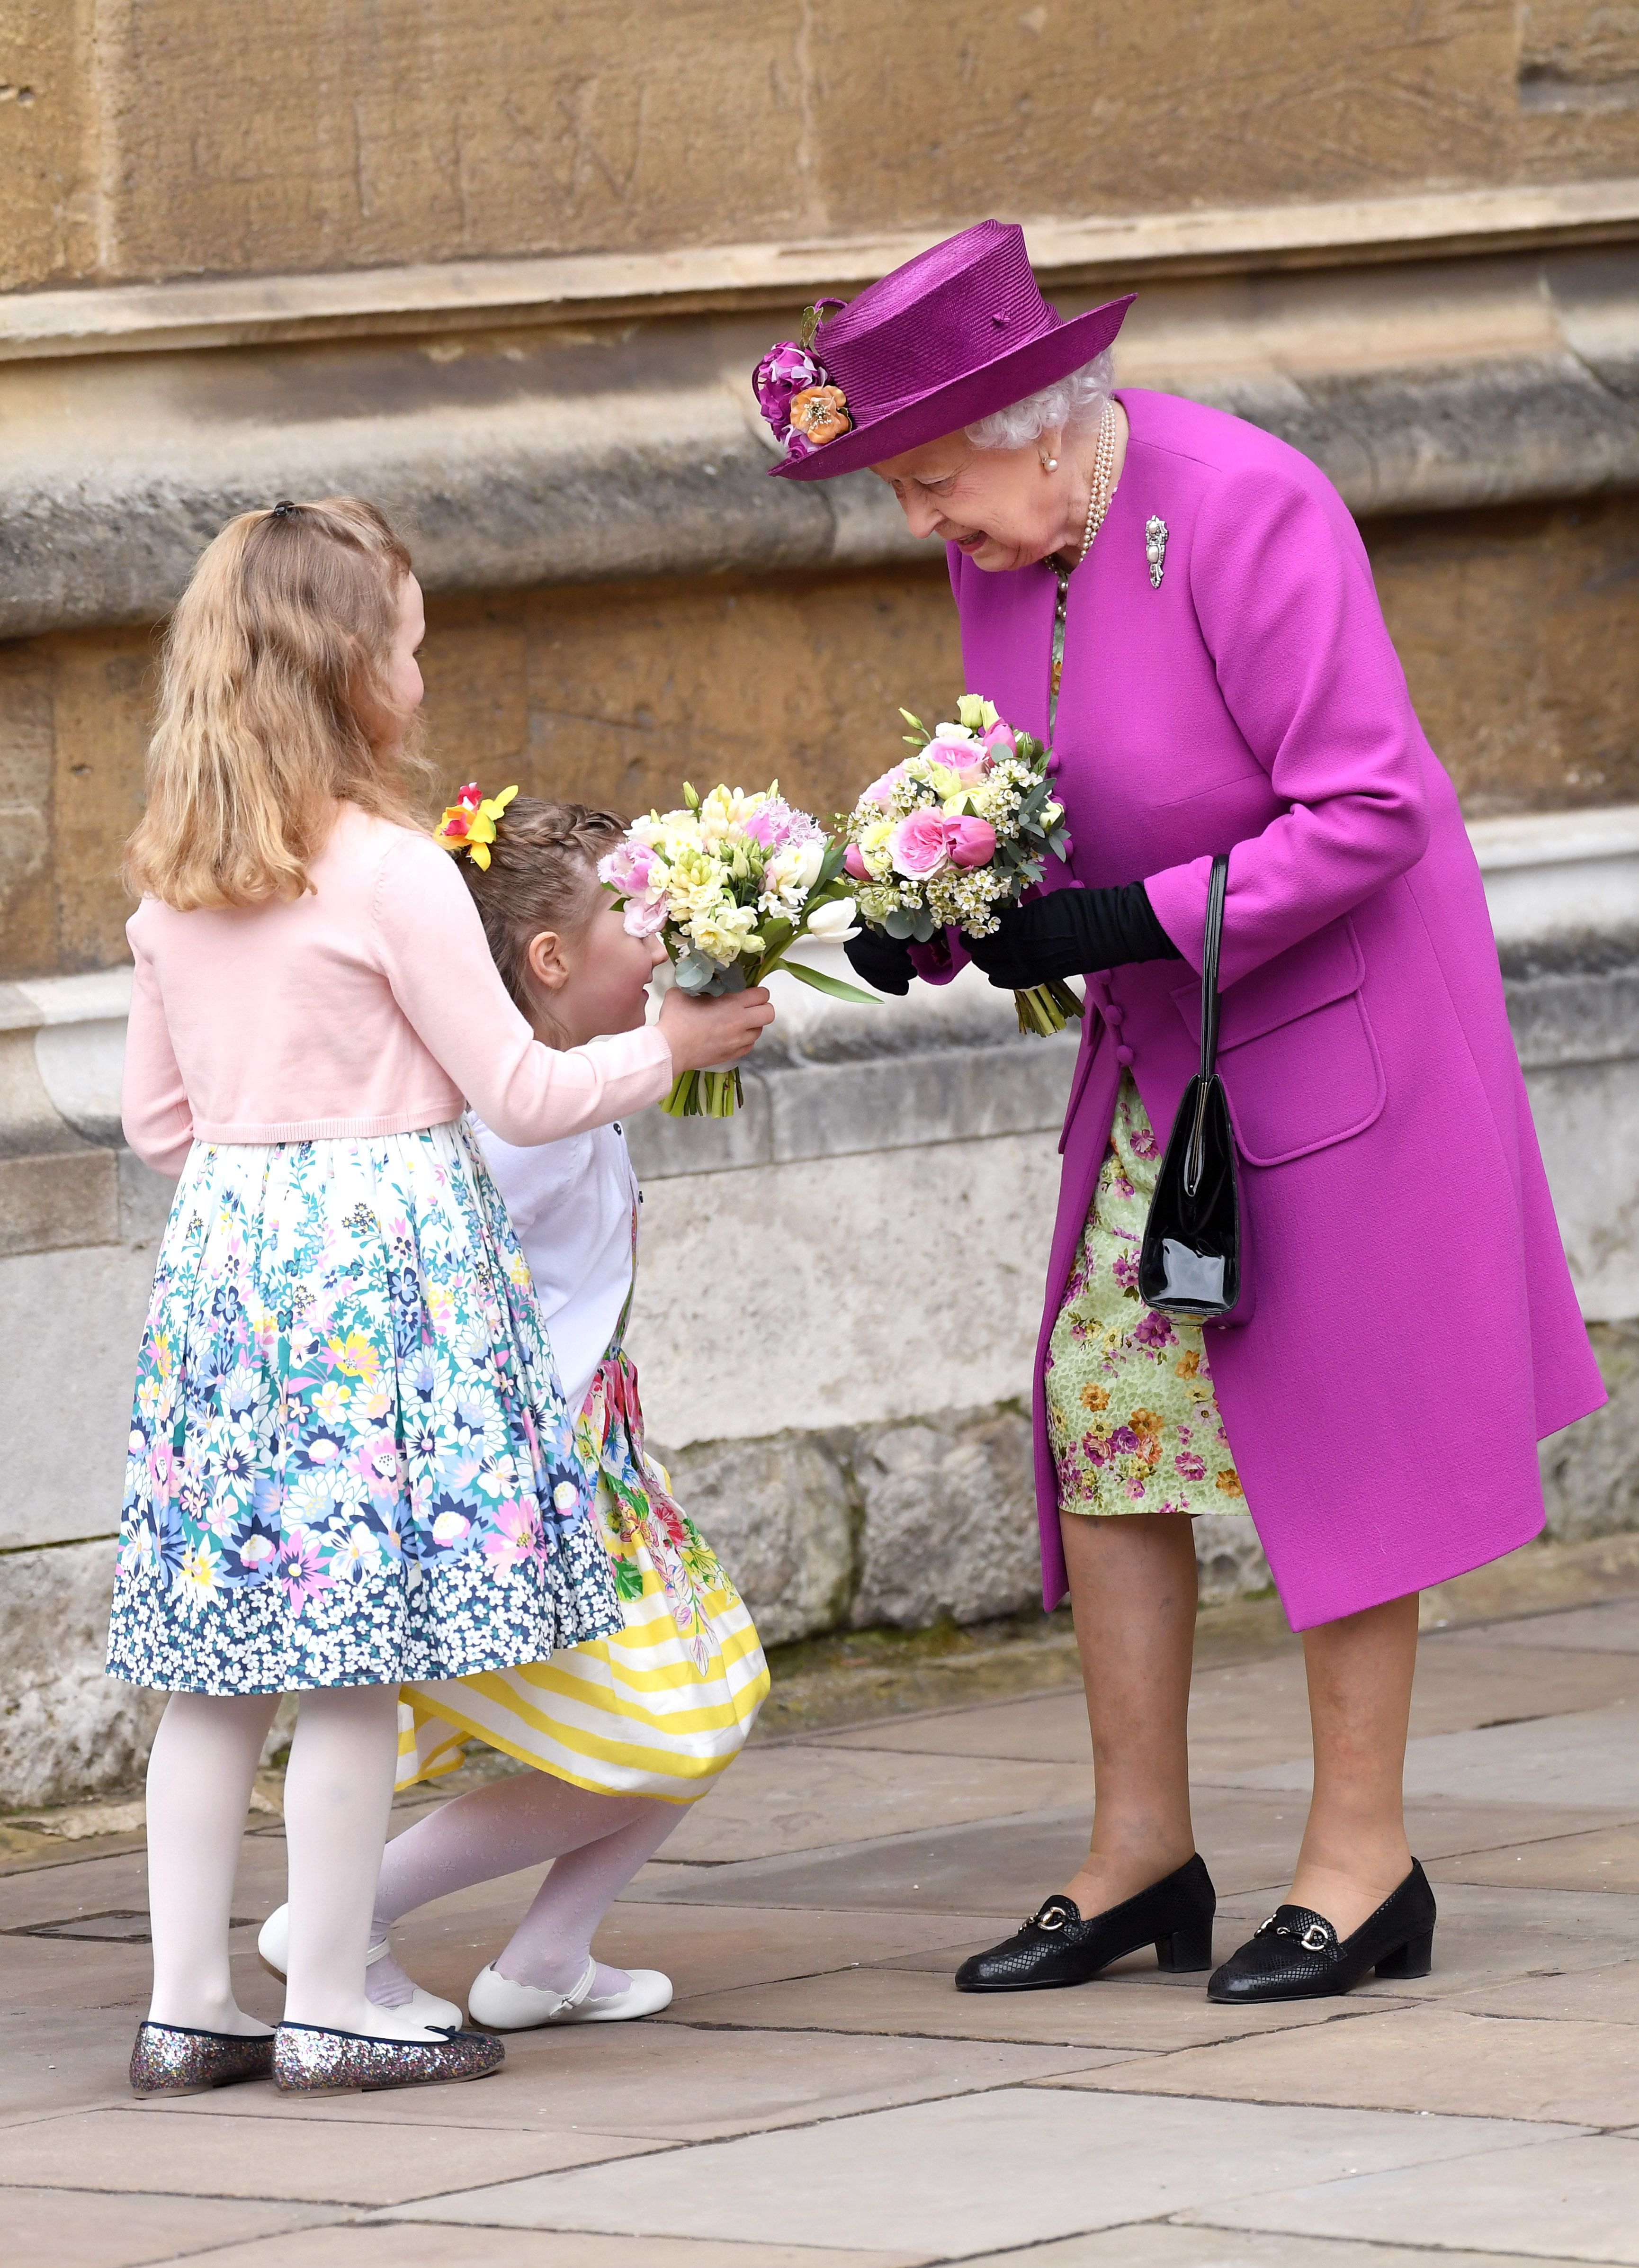 Prince William And Kate Middleton Were Late To Easter Services With Queen Elizabeth Photos Of The Royal Family On Easter 18